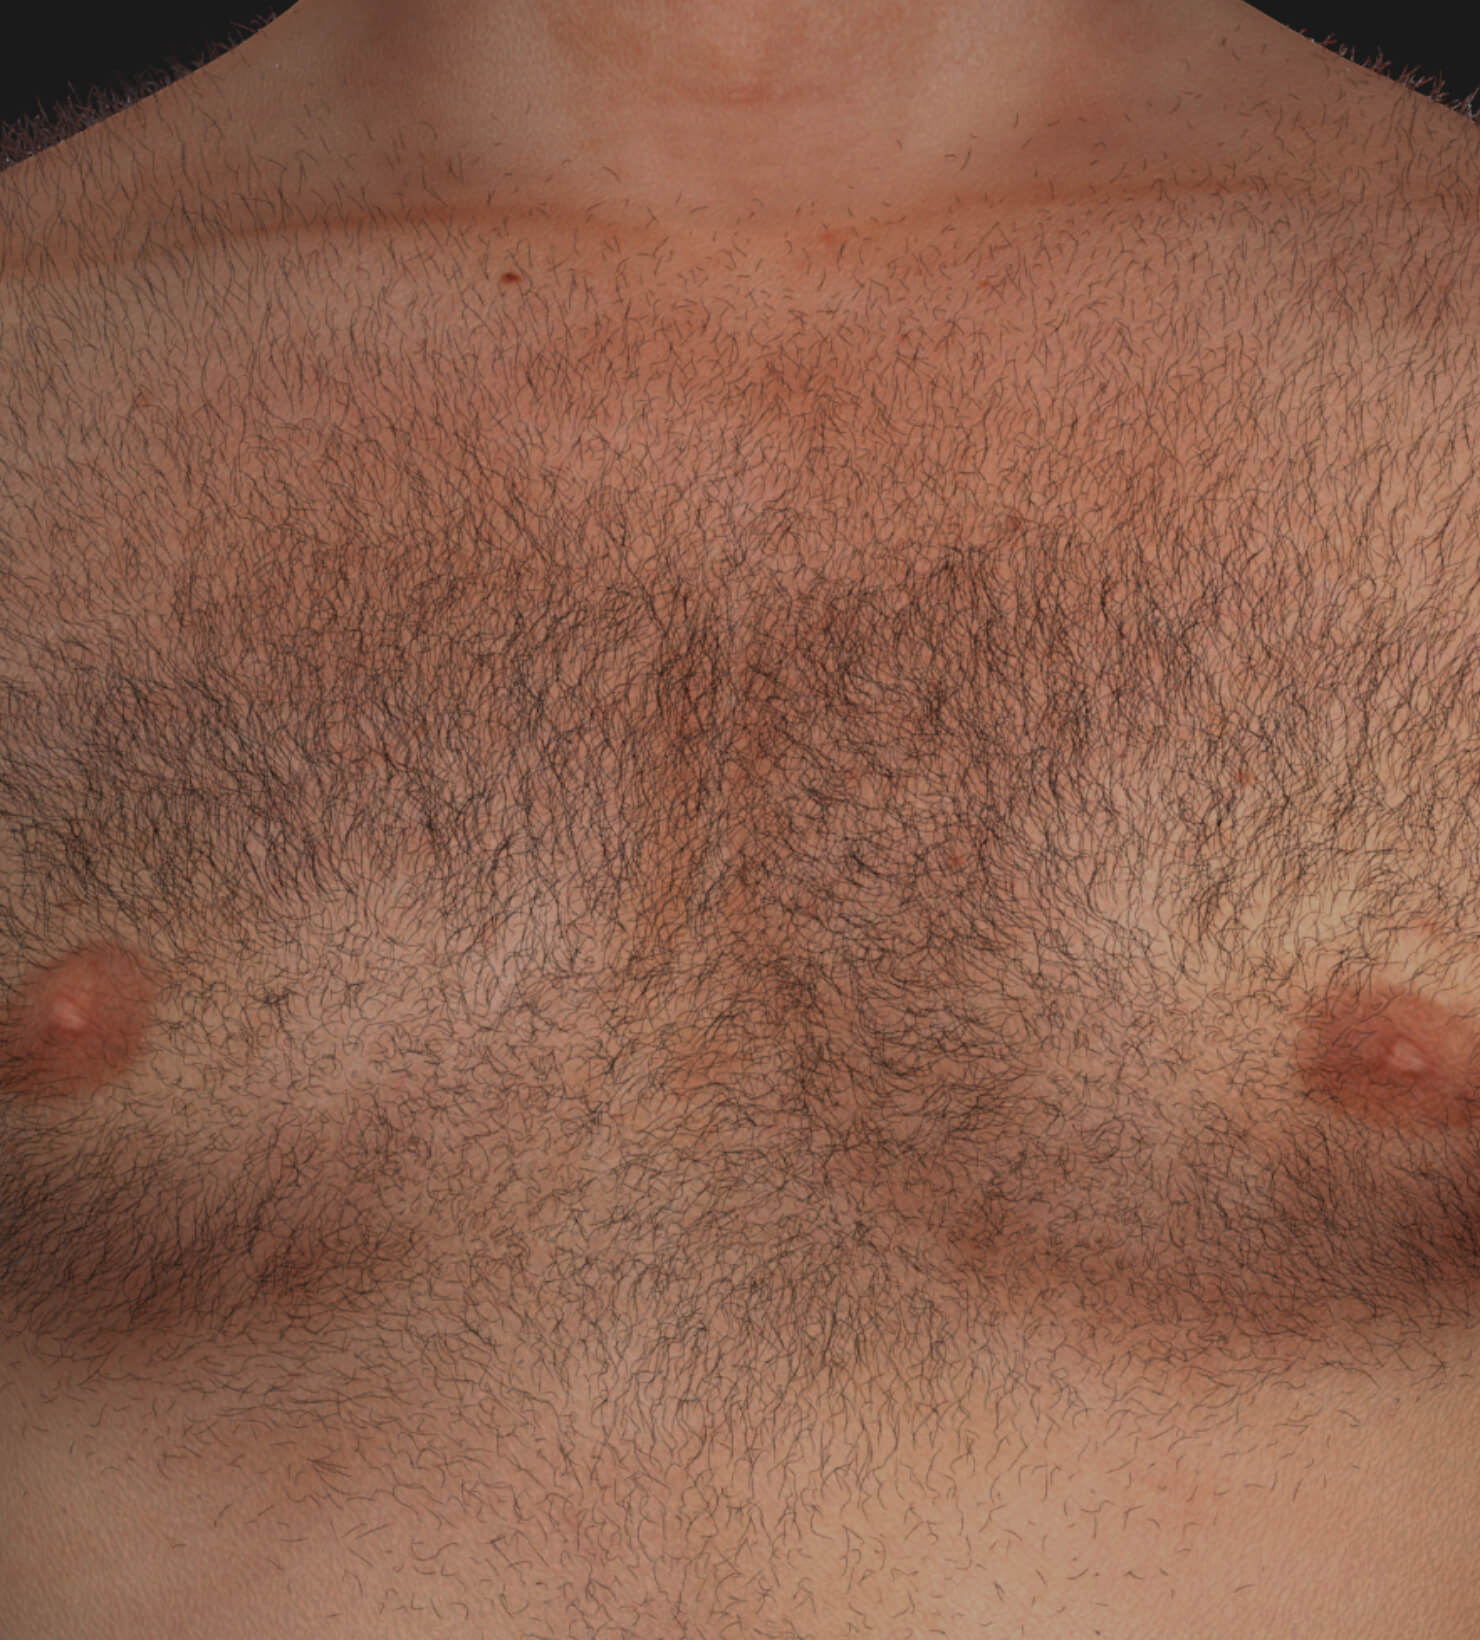 Chest of a Clinique Chloé male patient with unwanted hair to be treated with permanent laser hair removal